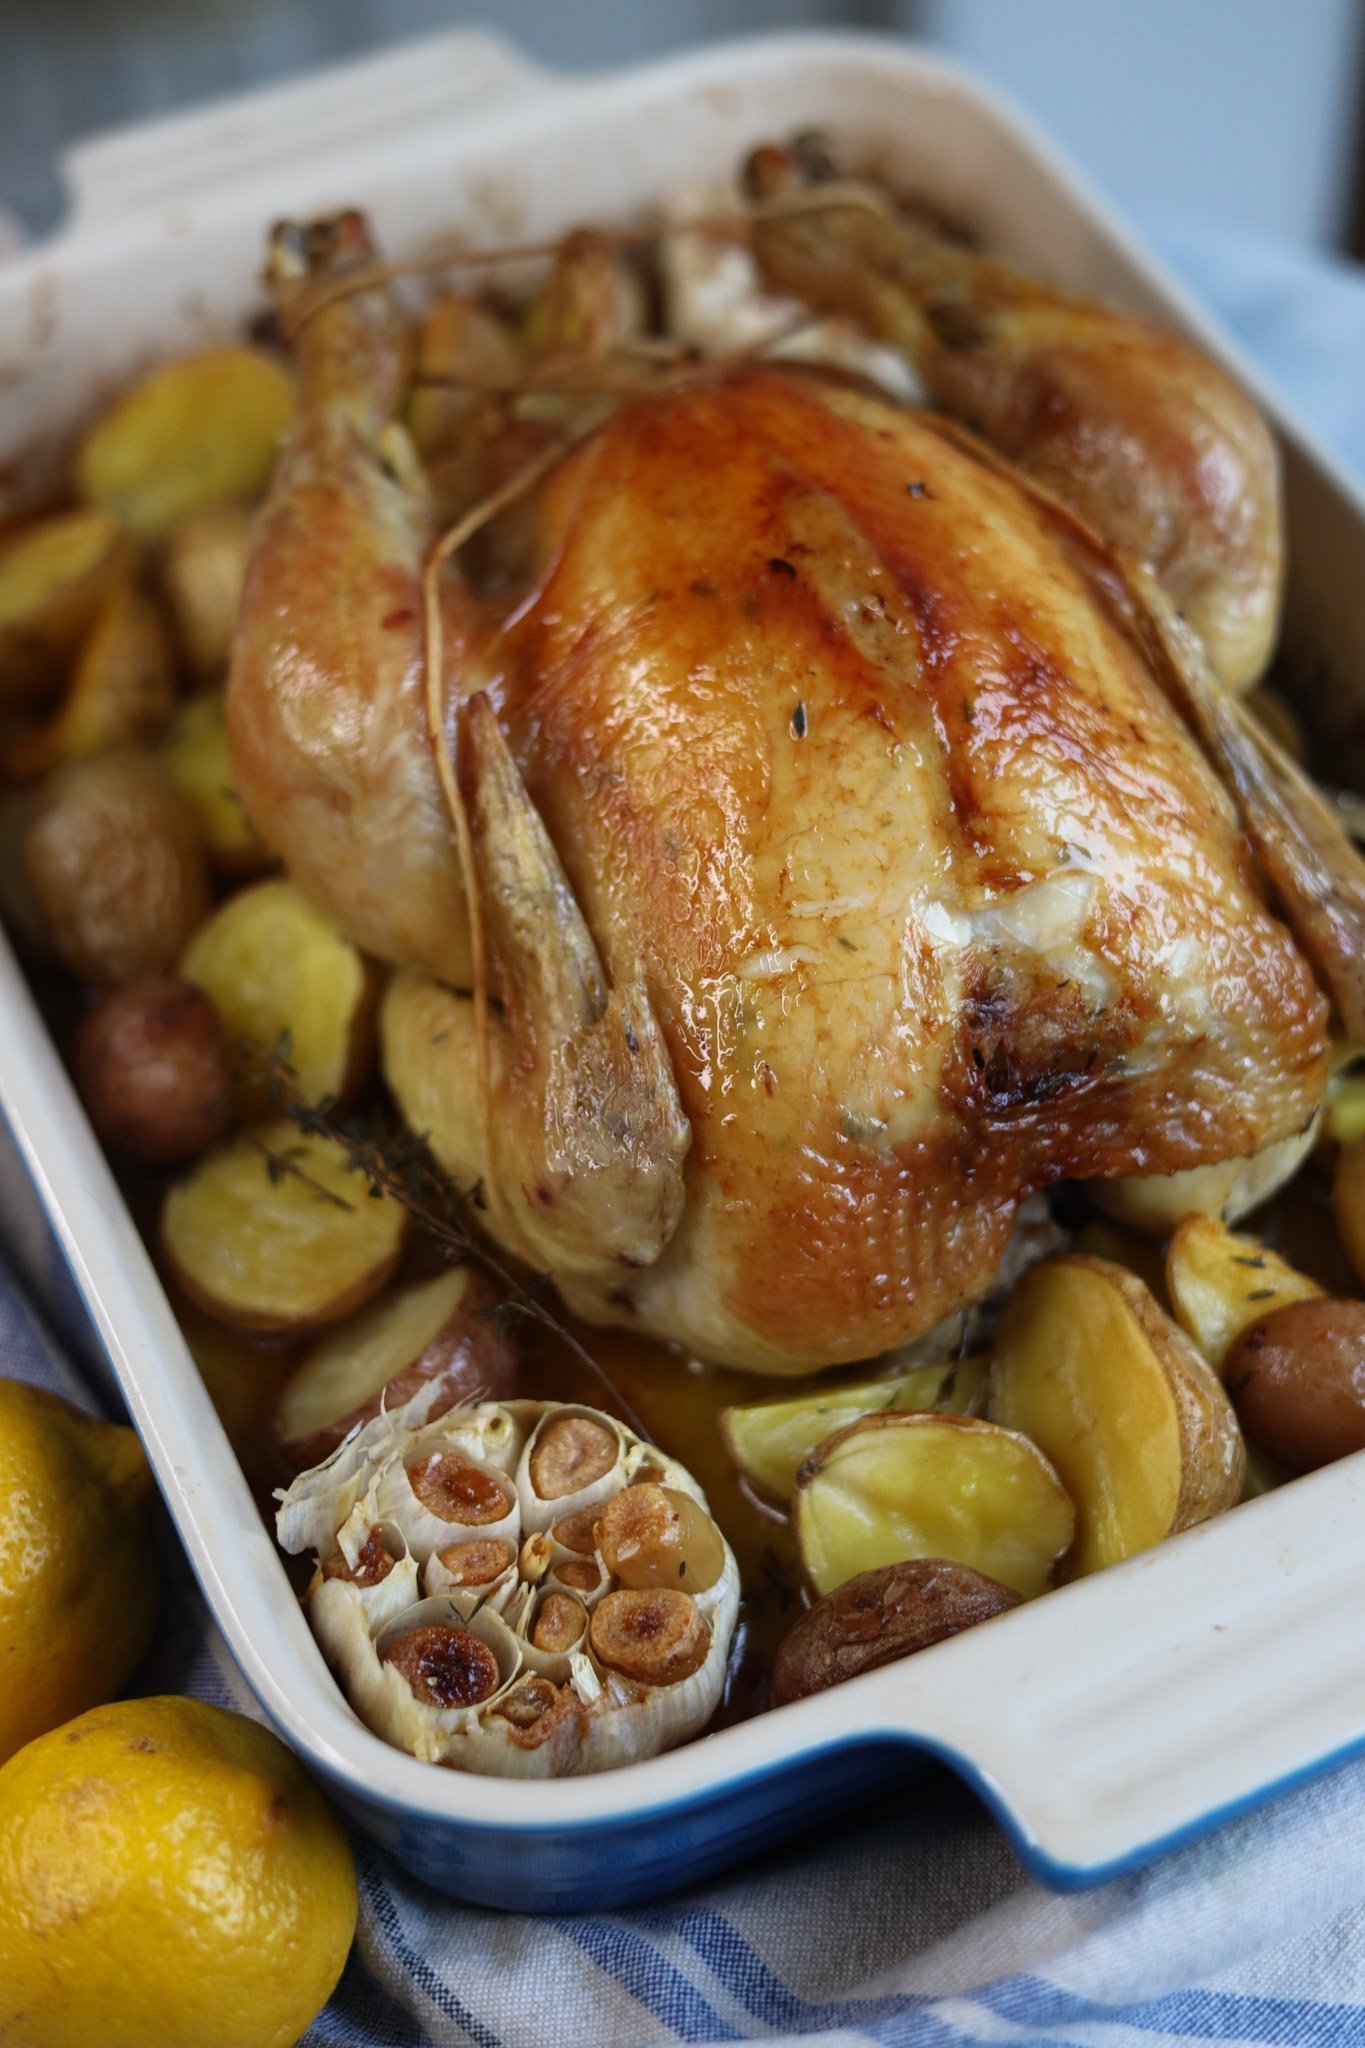 poulet roti - roast chicken with lemon and thyme and garlic fresh out of the oven